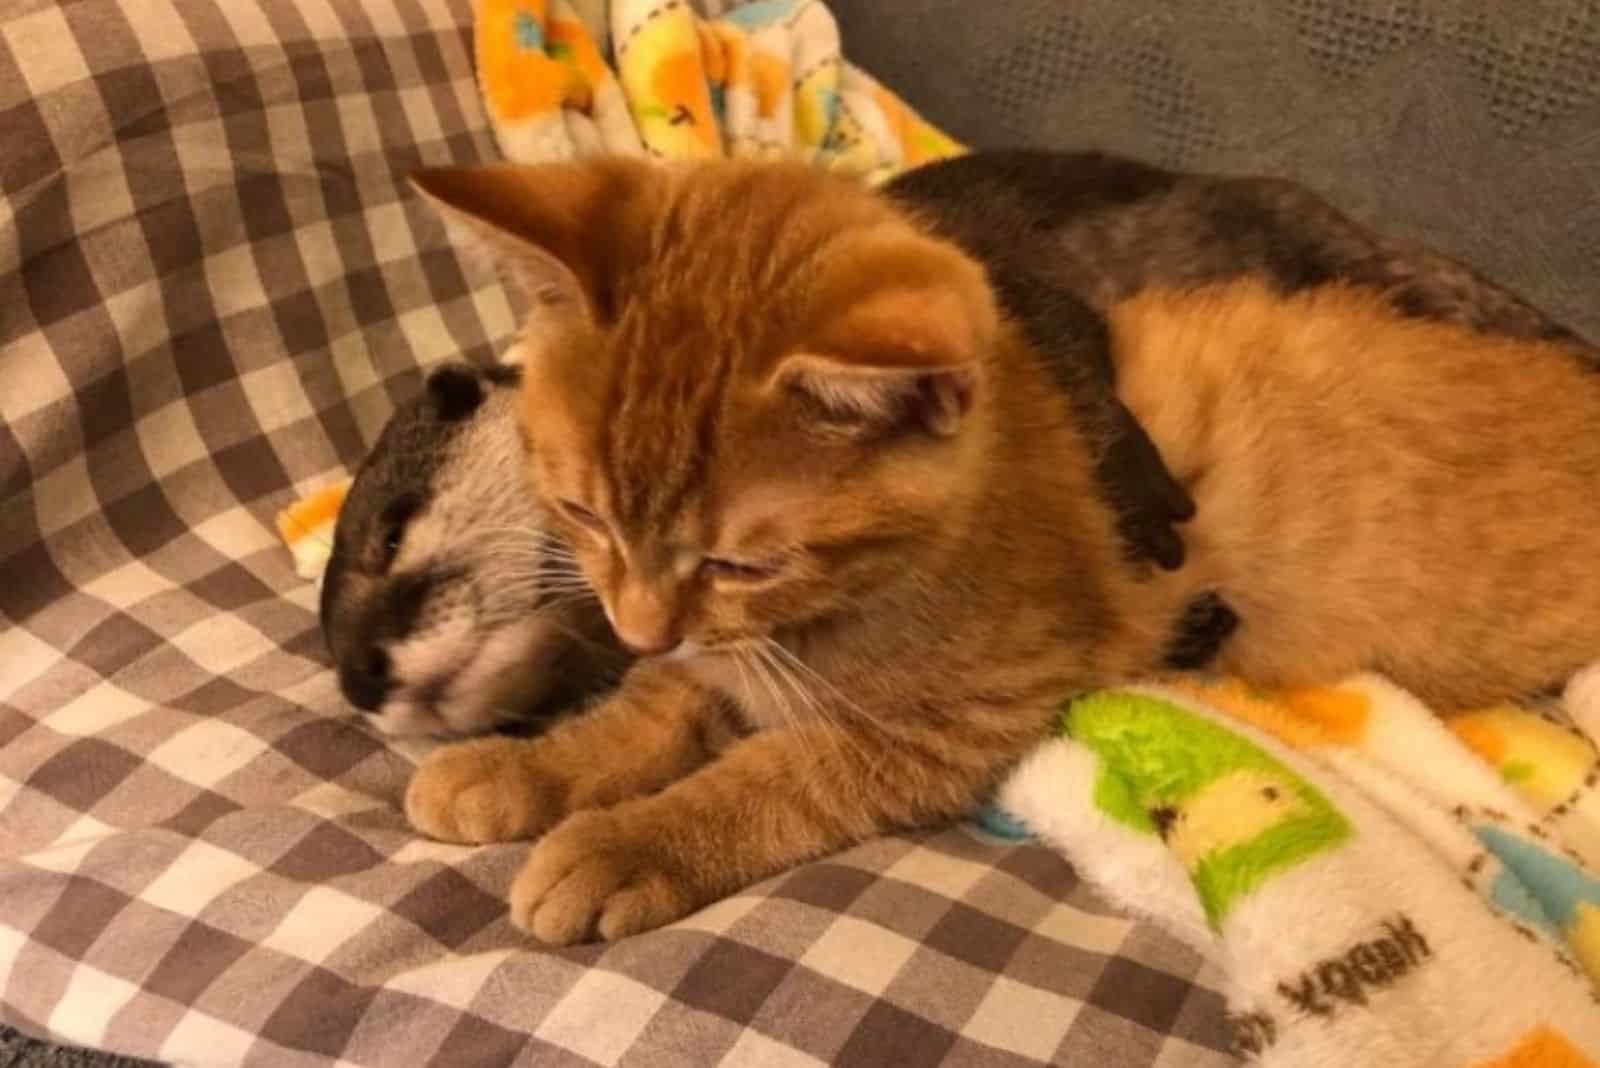 the otter sleeps next to the yellow cat